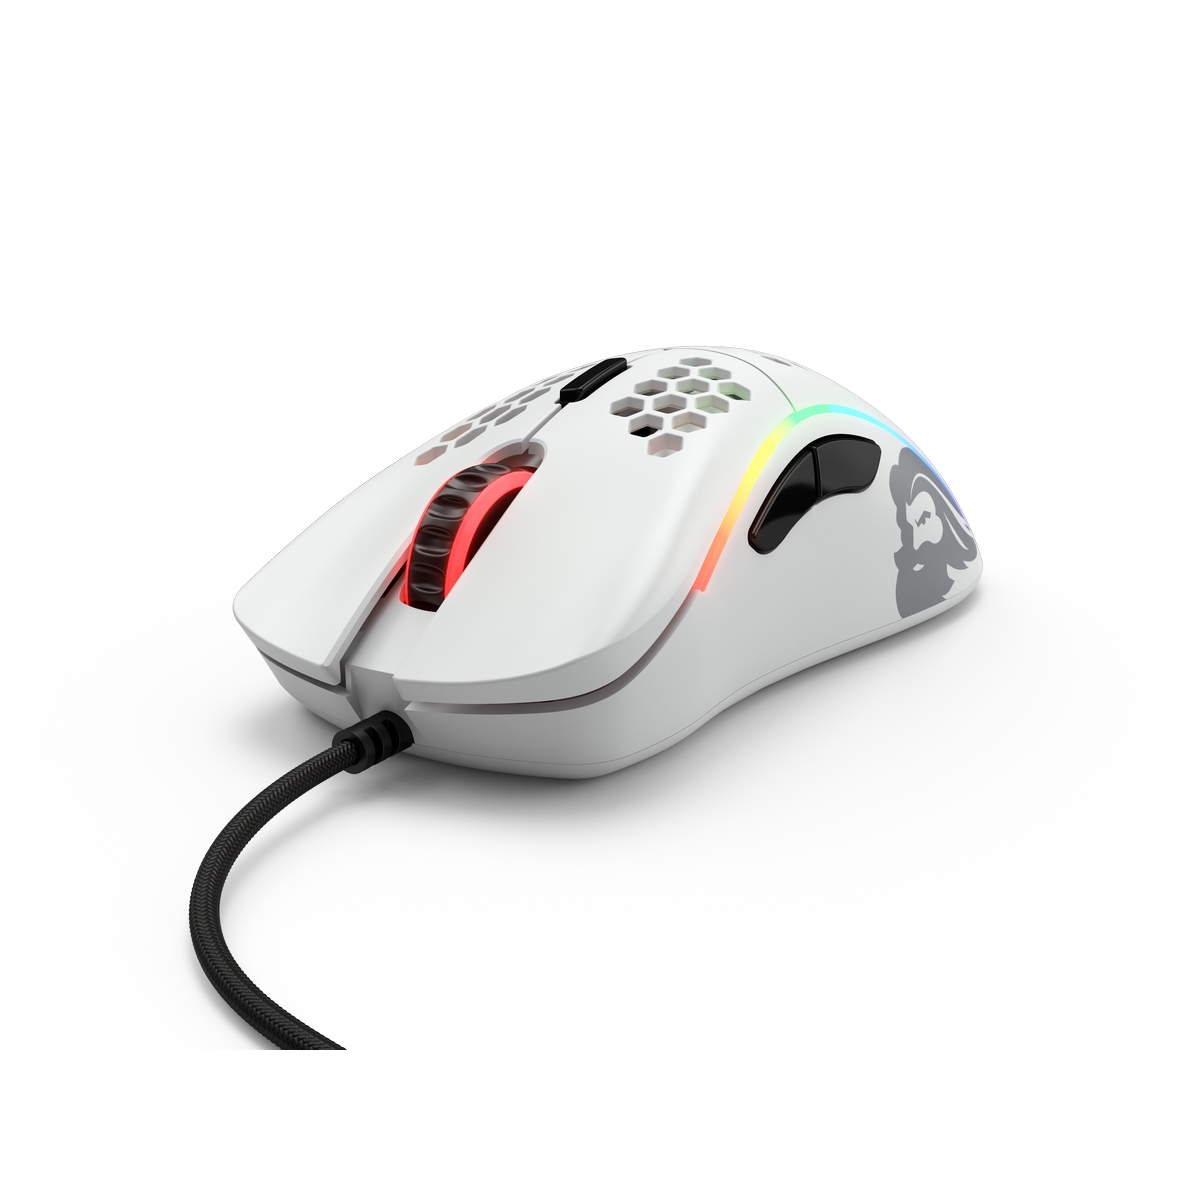 Glorious Model D USB RGB Optical Gaming Mouse - Matte White (GD-WHITE)